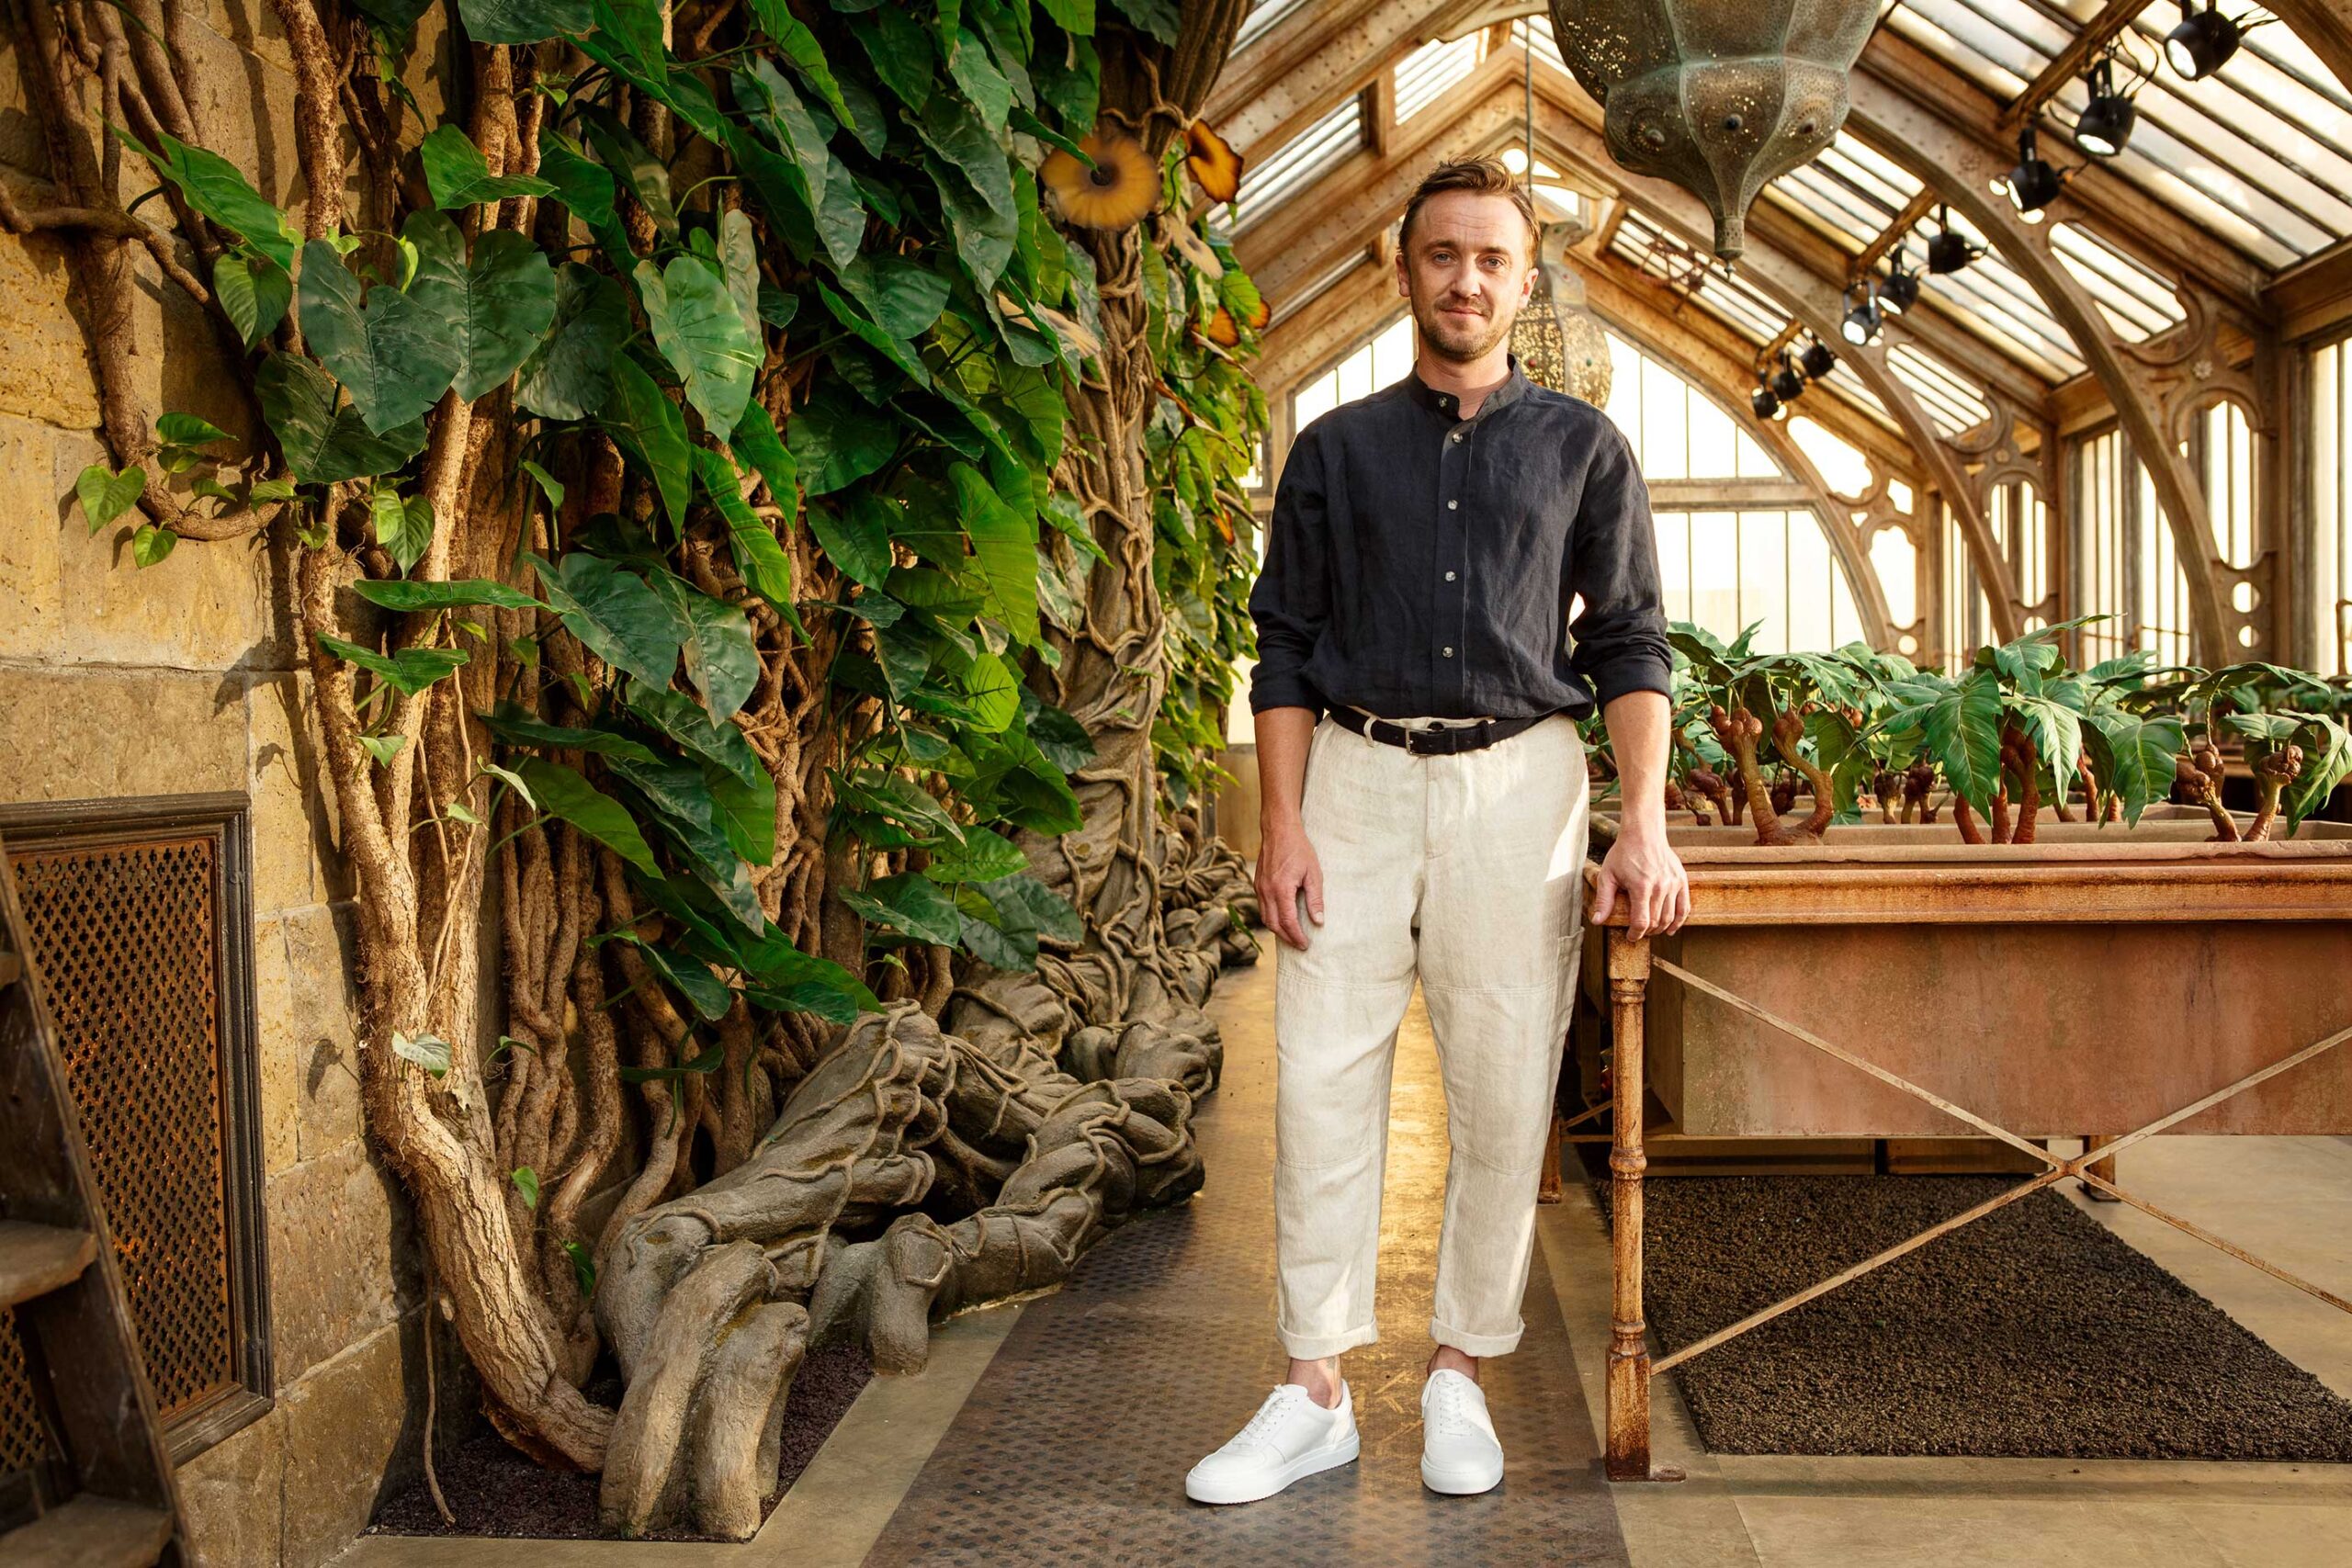 Tom Felton, who played Draco Malfoy, inside Professor Sprout's greenhouse set at Warner Bros. Studio Tour London